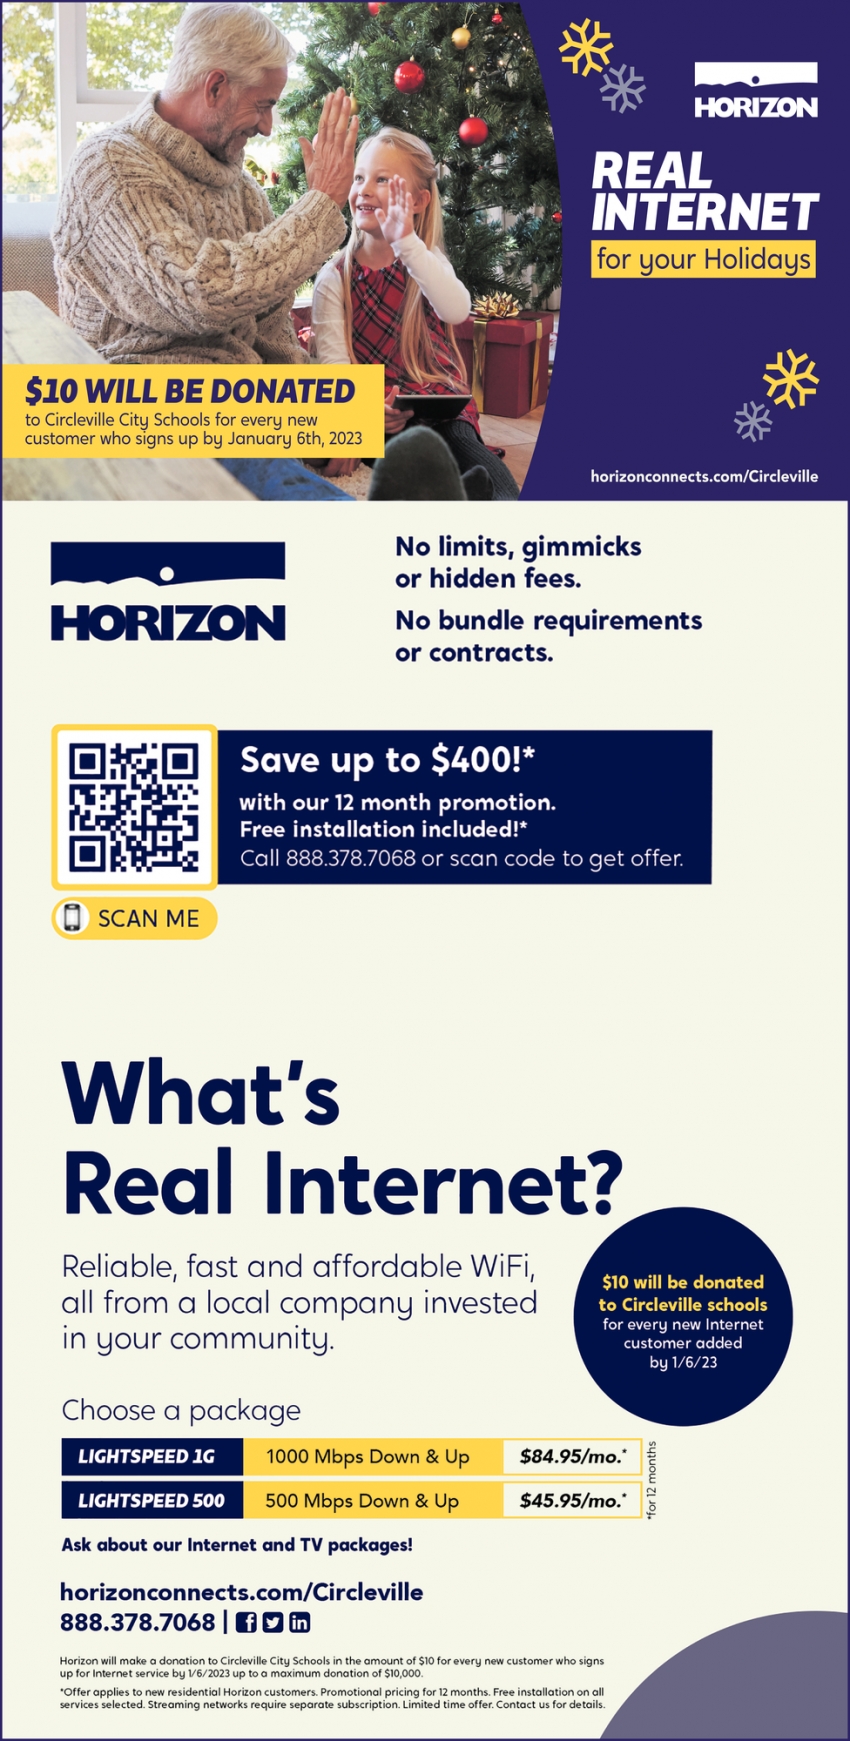 Real Internet For Your Holidays